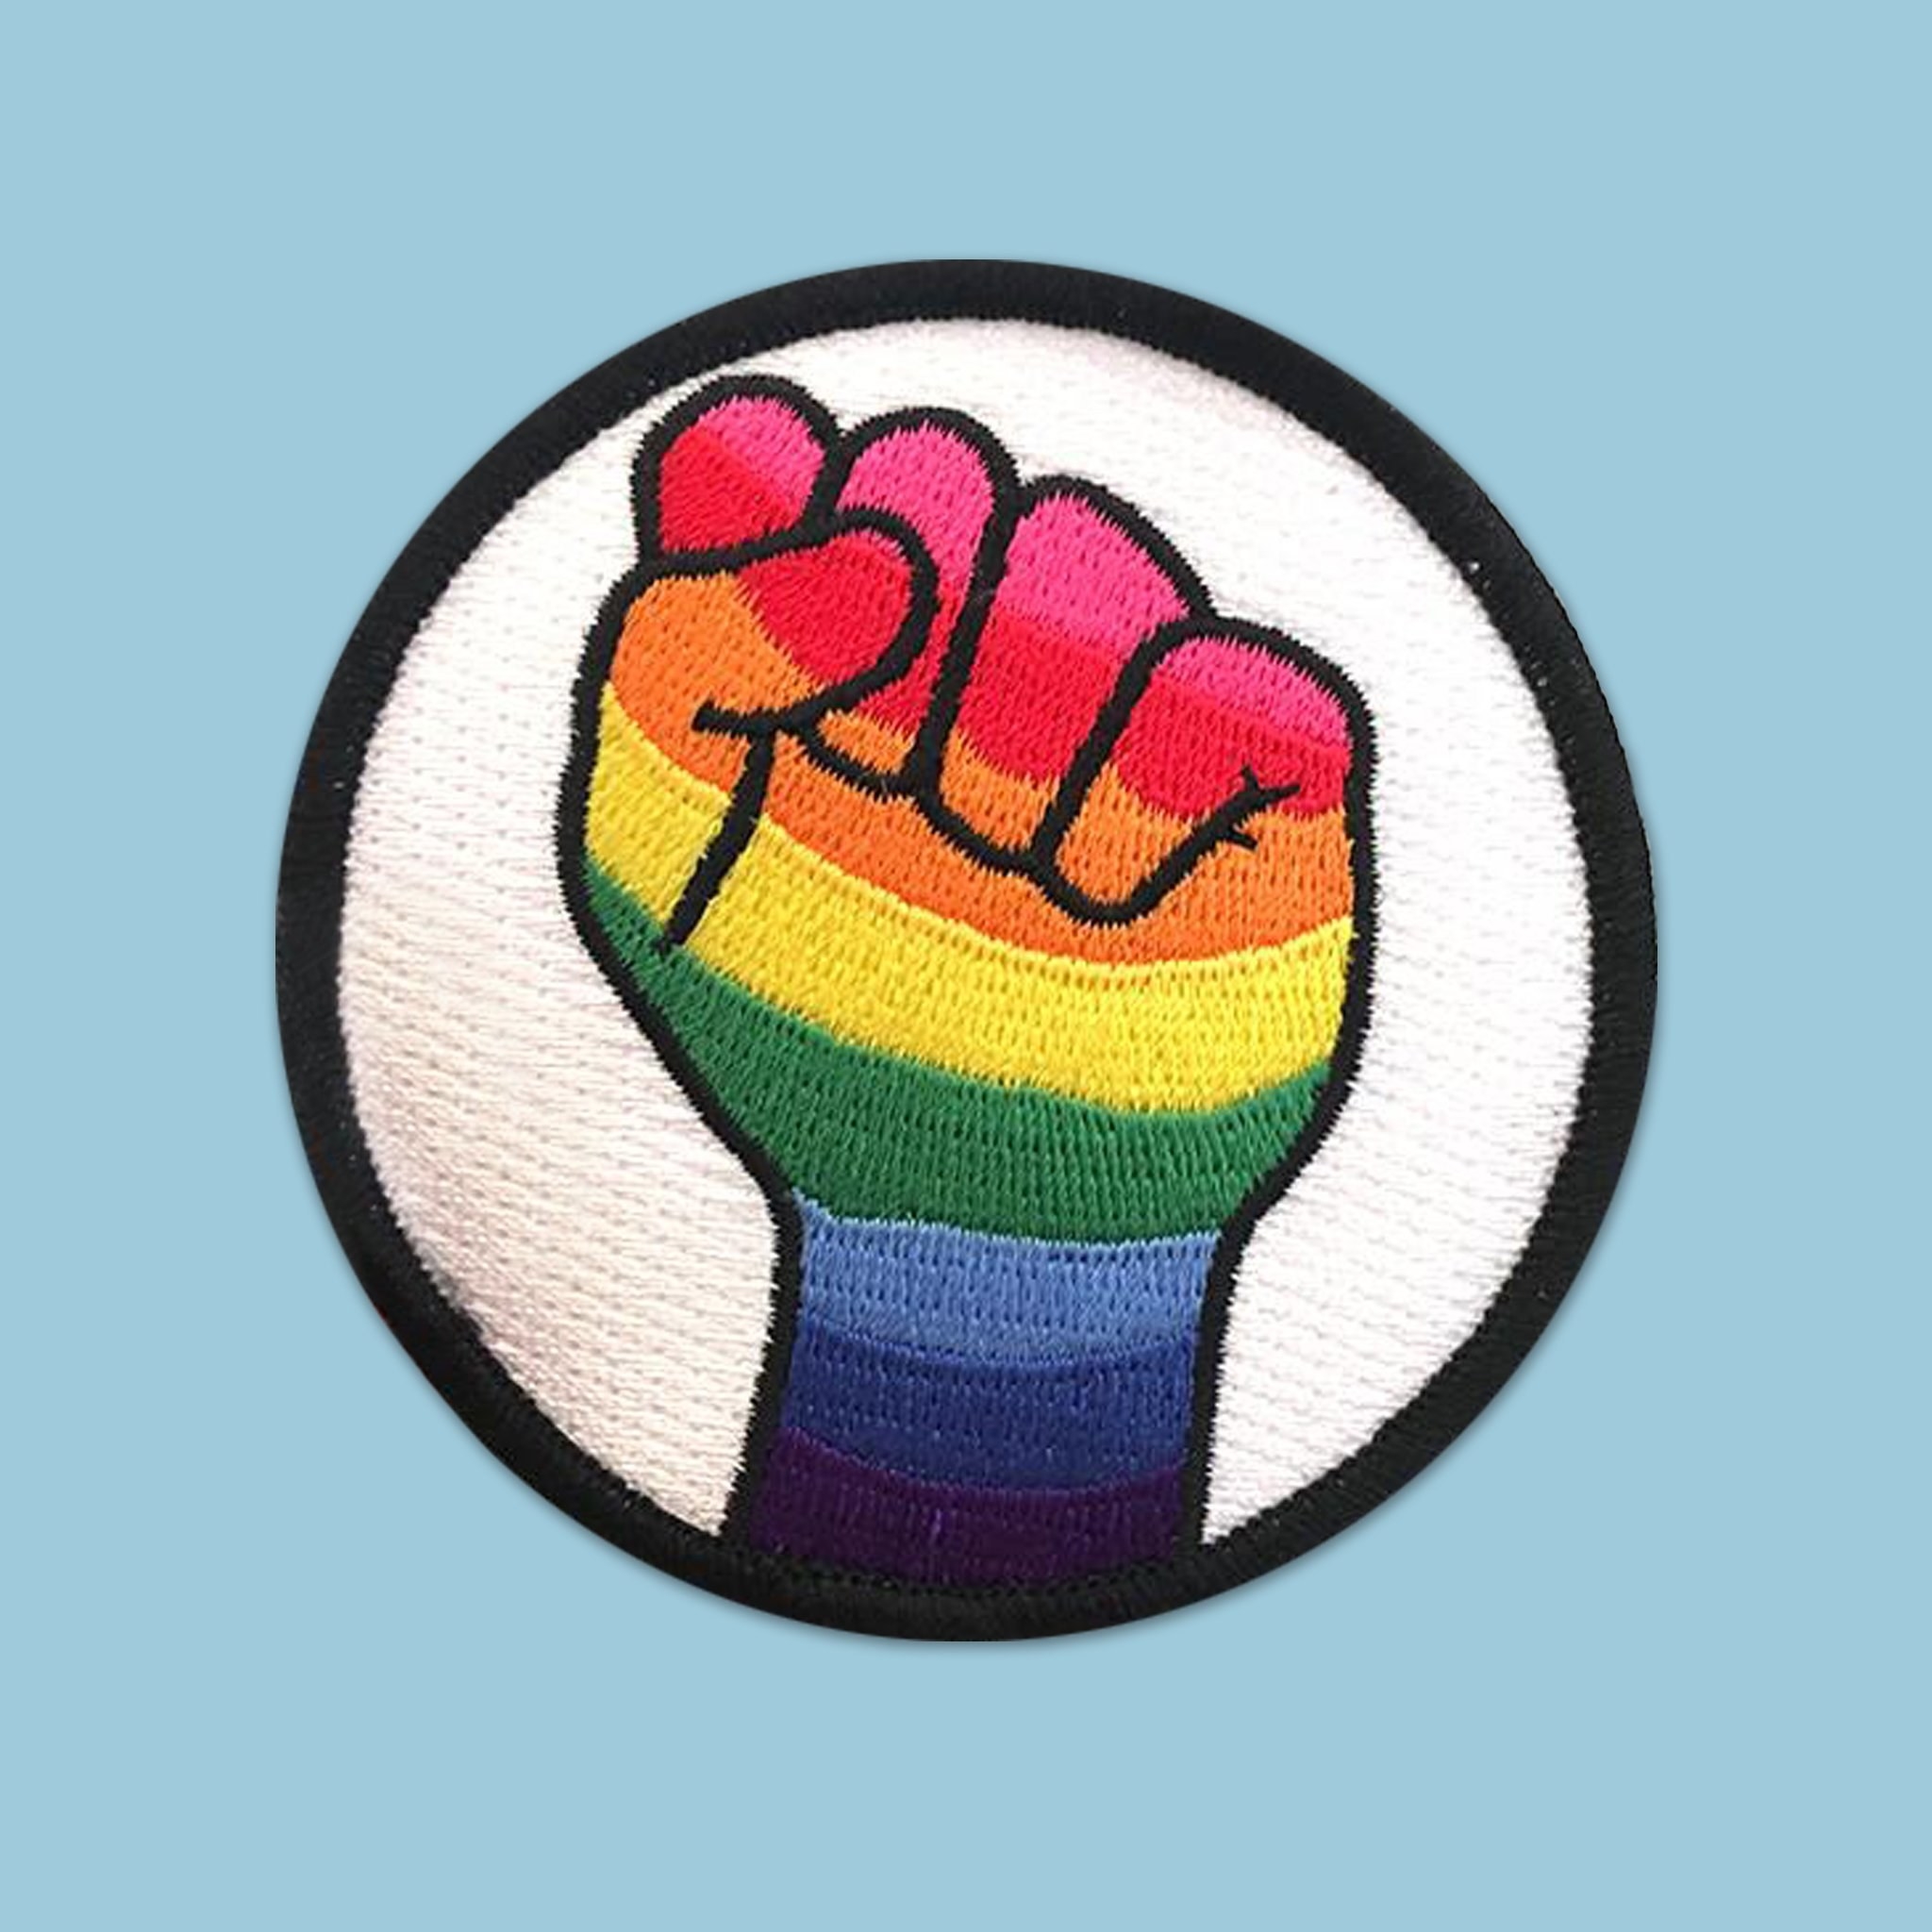 the rainbow fist patch in front of a sky blue background